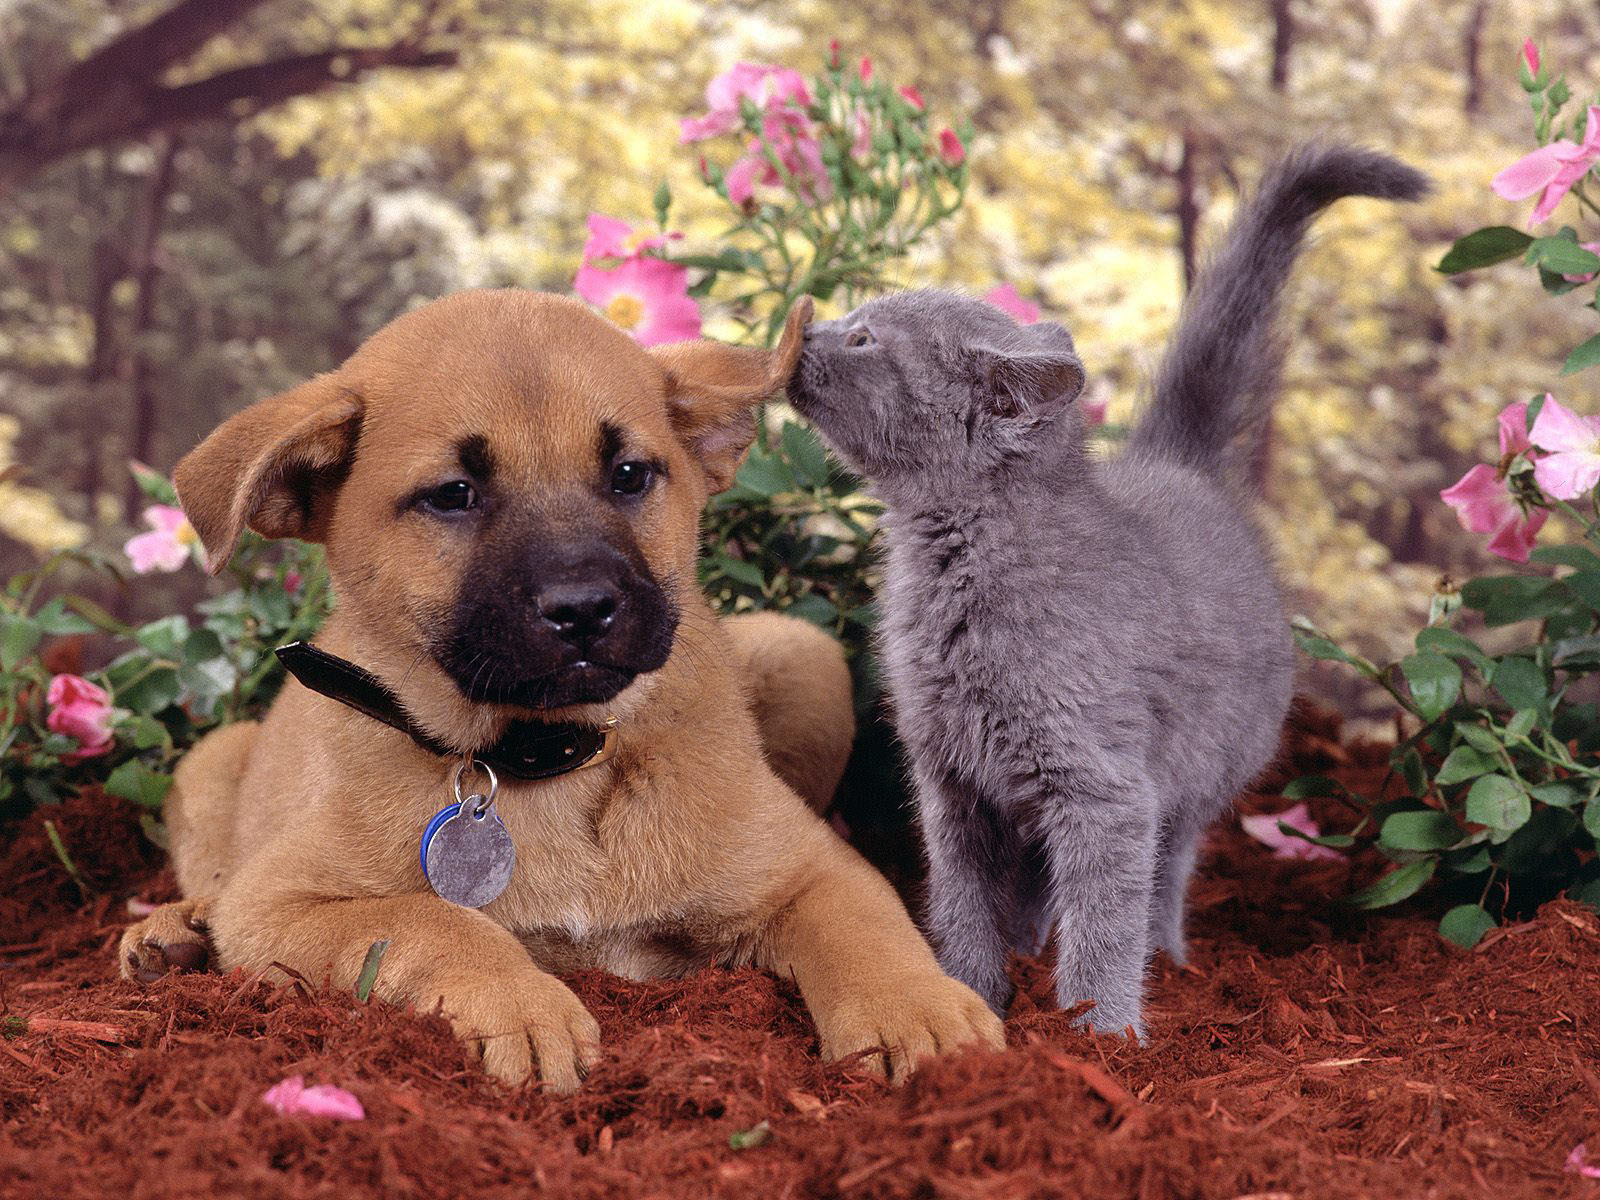 Dogs and Cats vs. cats Wallpaper